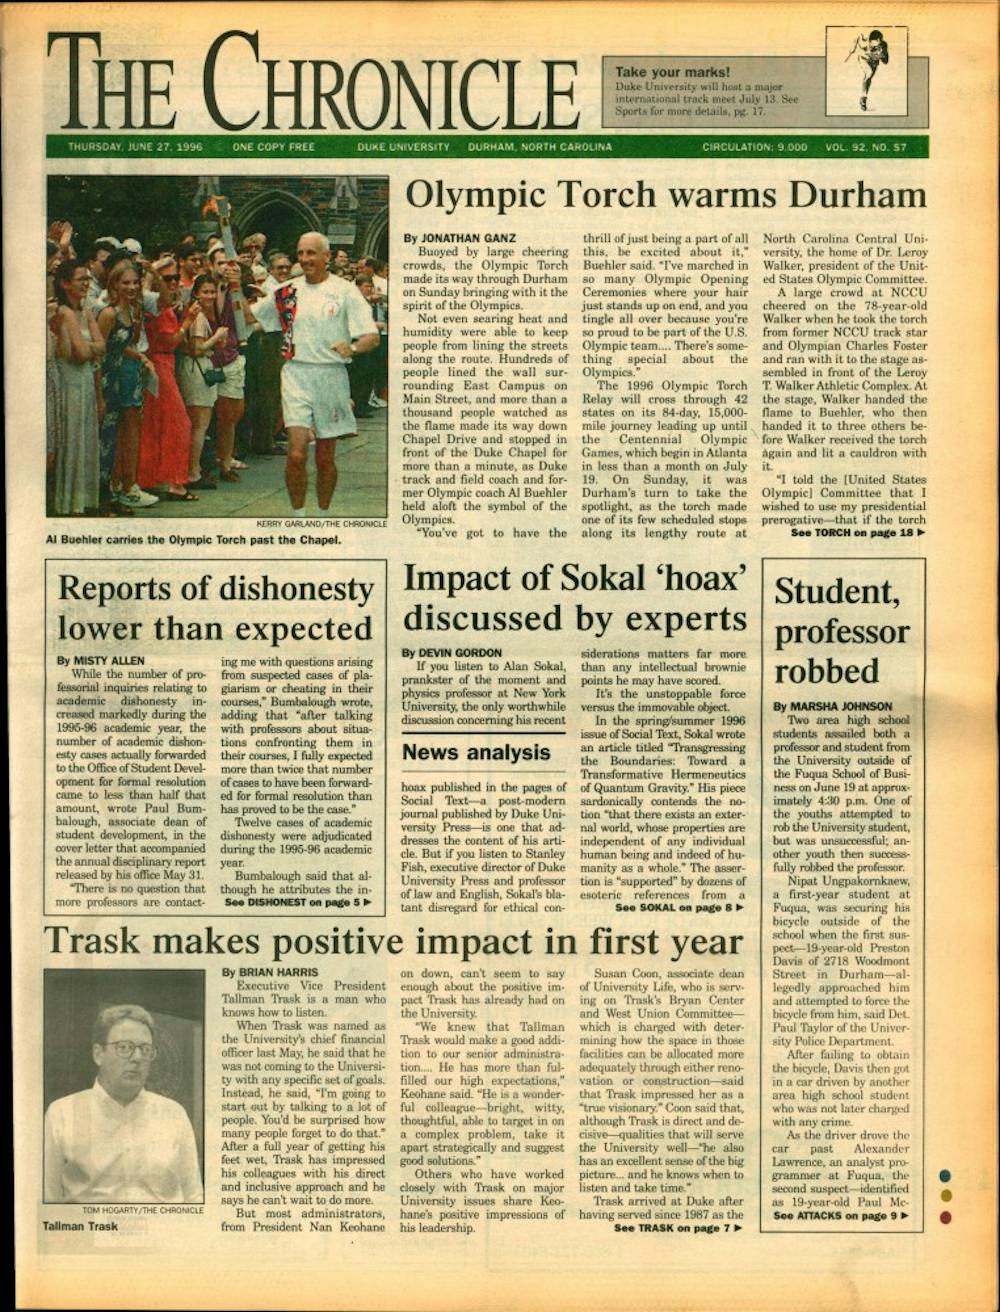 <p>During its tour leading up to the 1996 Atlanta Summer Olympics, the torch made its way to Durham. </p>